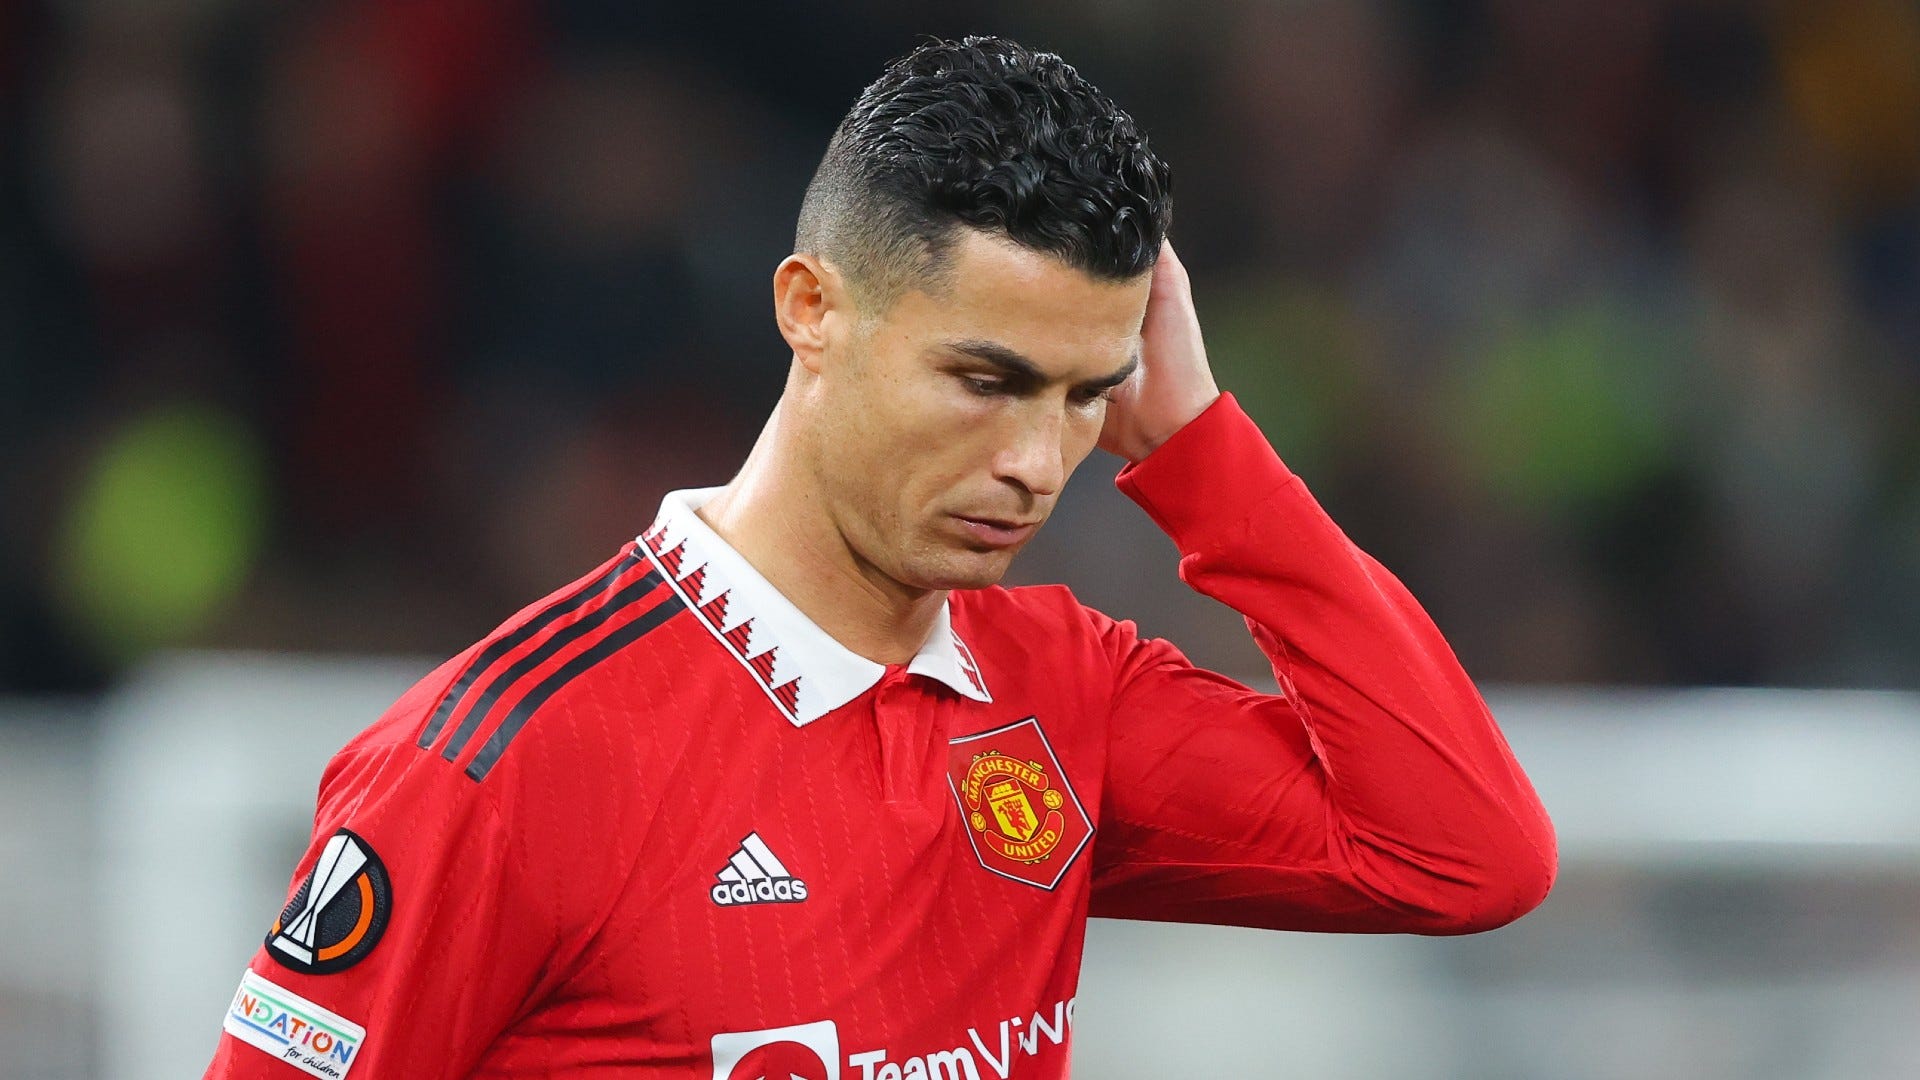 Man Utd confirm Cristiano Ronaldo is set to leave club by mutual agreement  with immediate effect | Goal.com